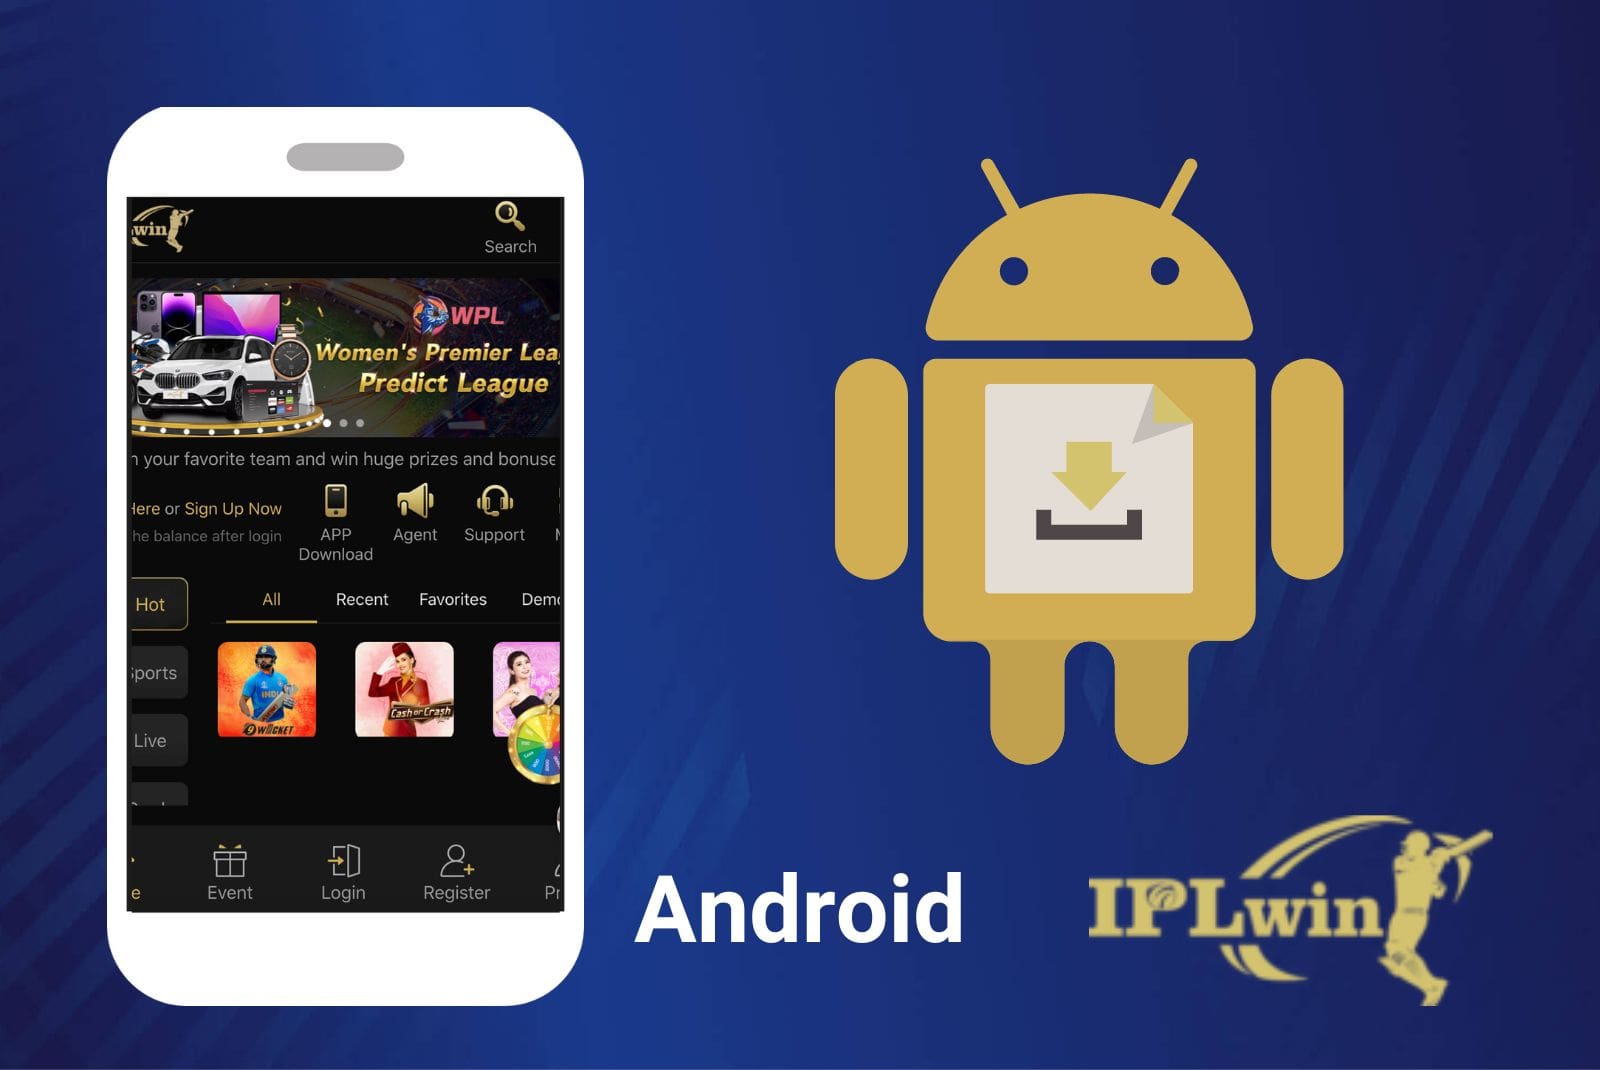 Features of Iplwin India Android application